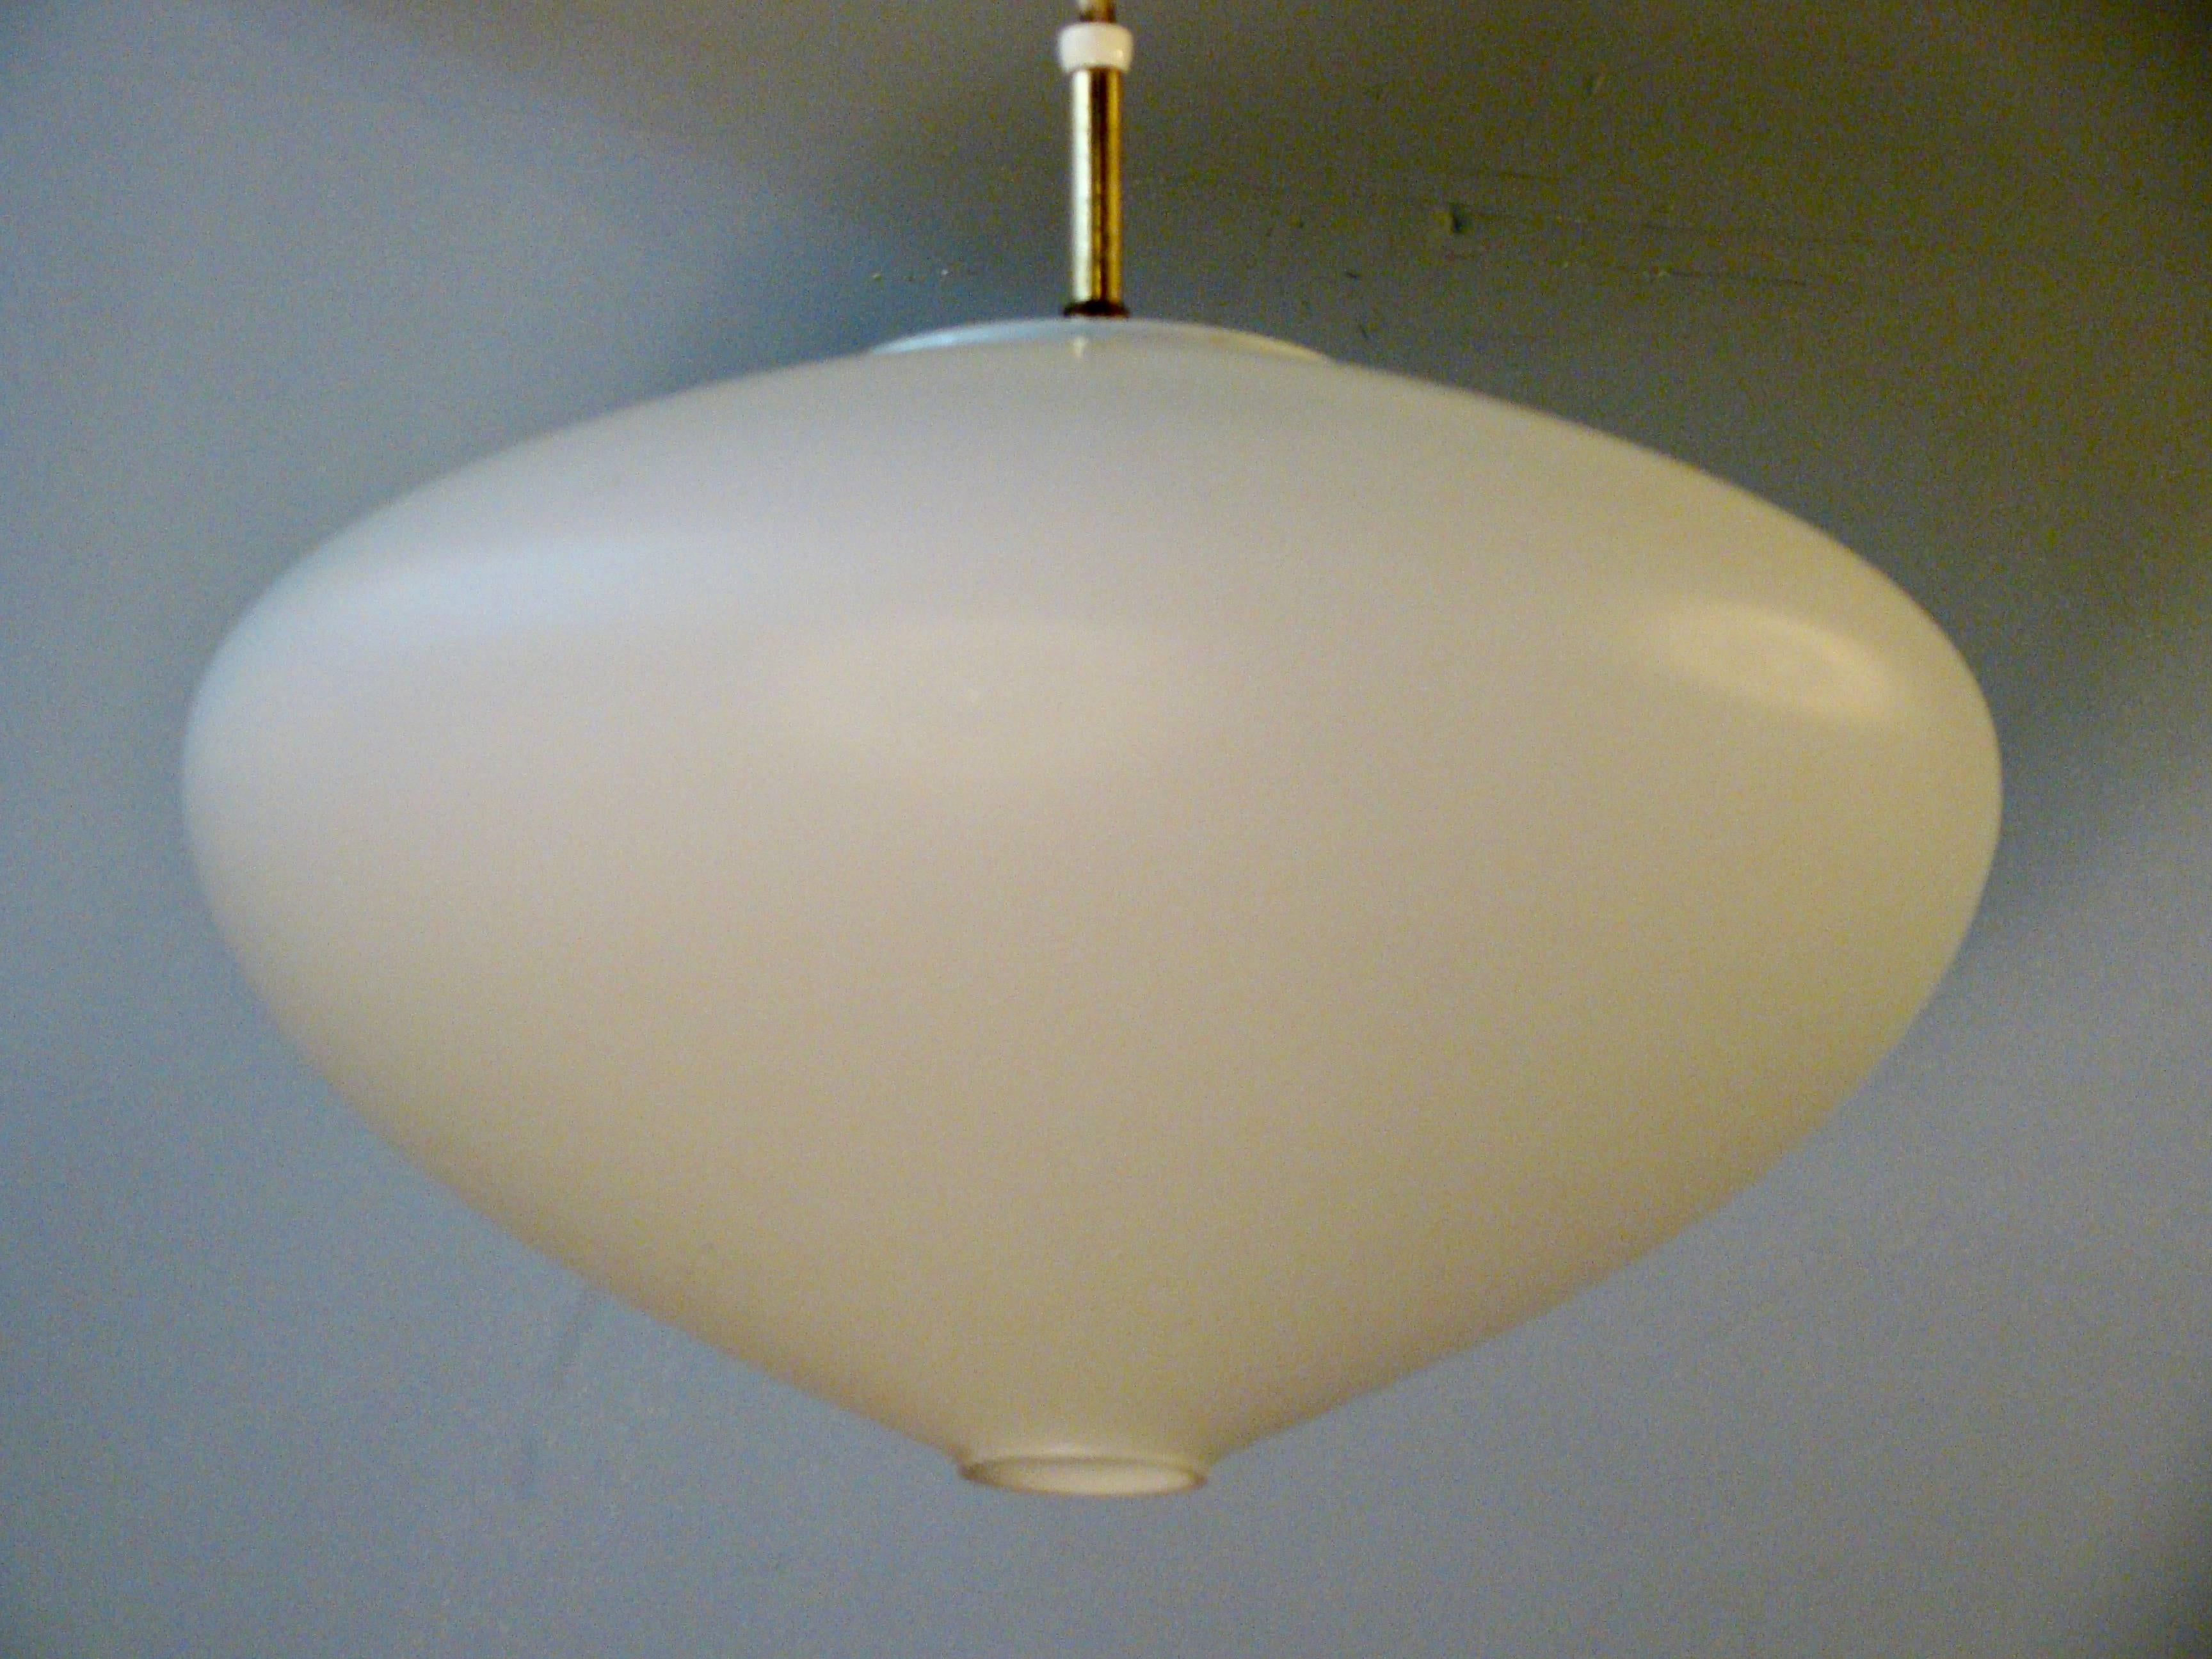 White opaline glass diamond shaped hanging pendant. Retains partial paper manufacturers sticker.

One more available
Measurement given below for height is to the top of the brass stem.